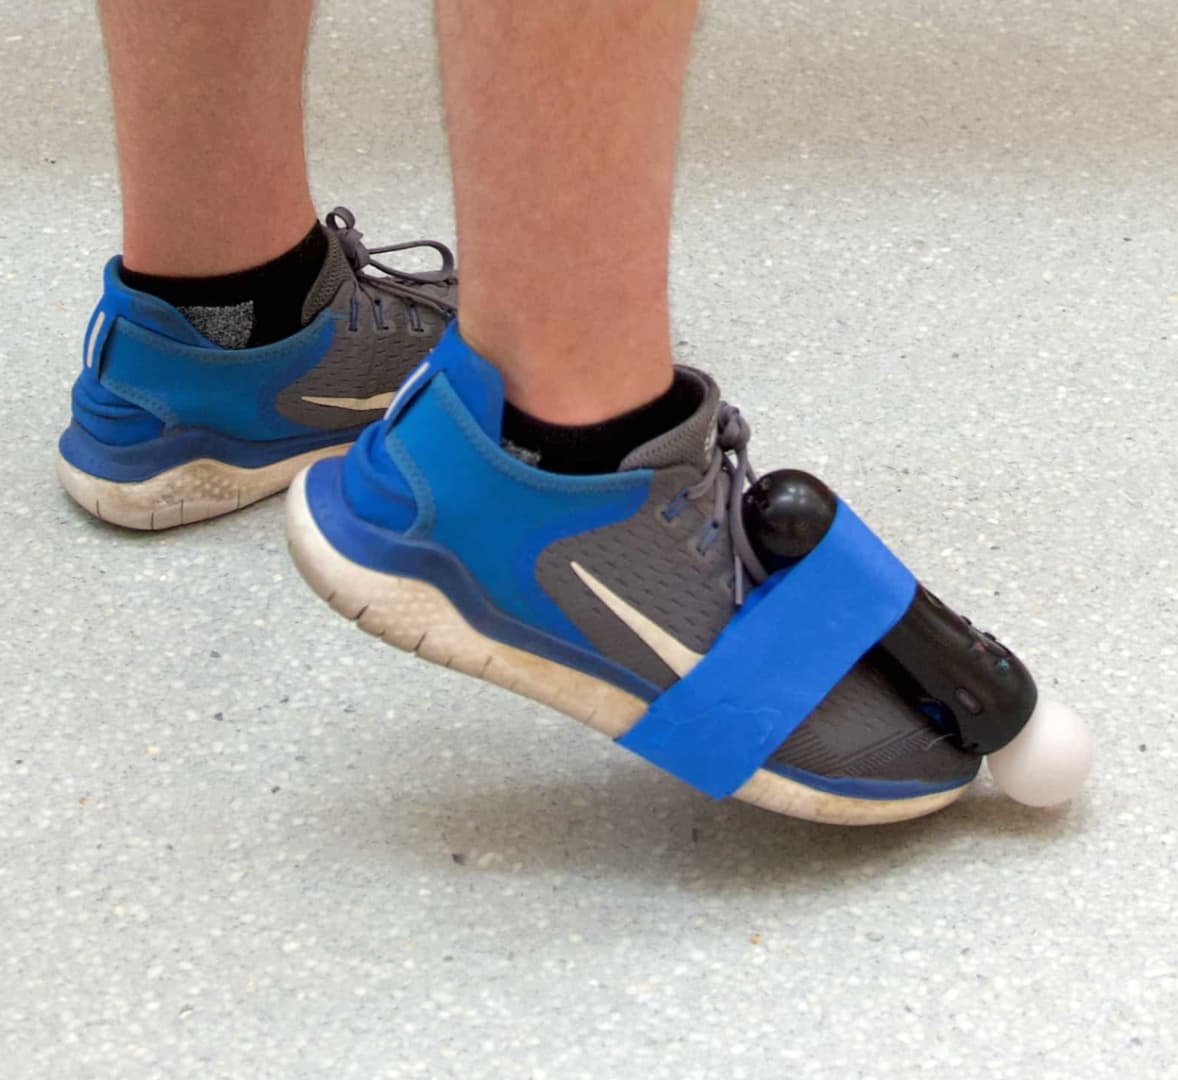 A foot wearing a shoe with a PlayStation Move motion controller taped to it. The foot is being pointed downwards towards the floor.